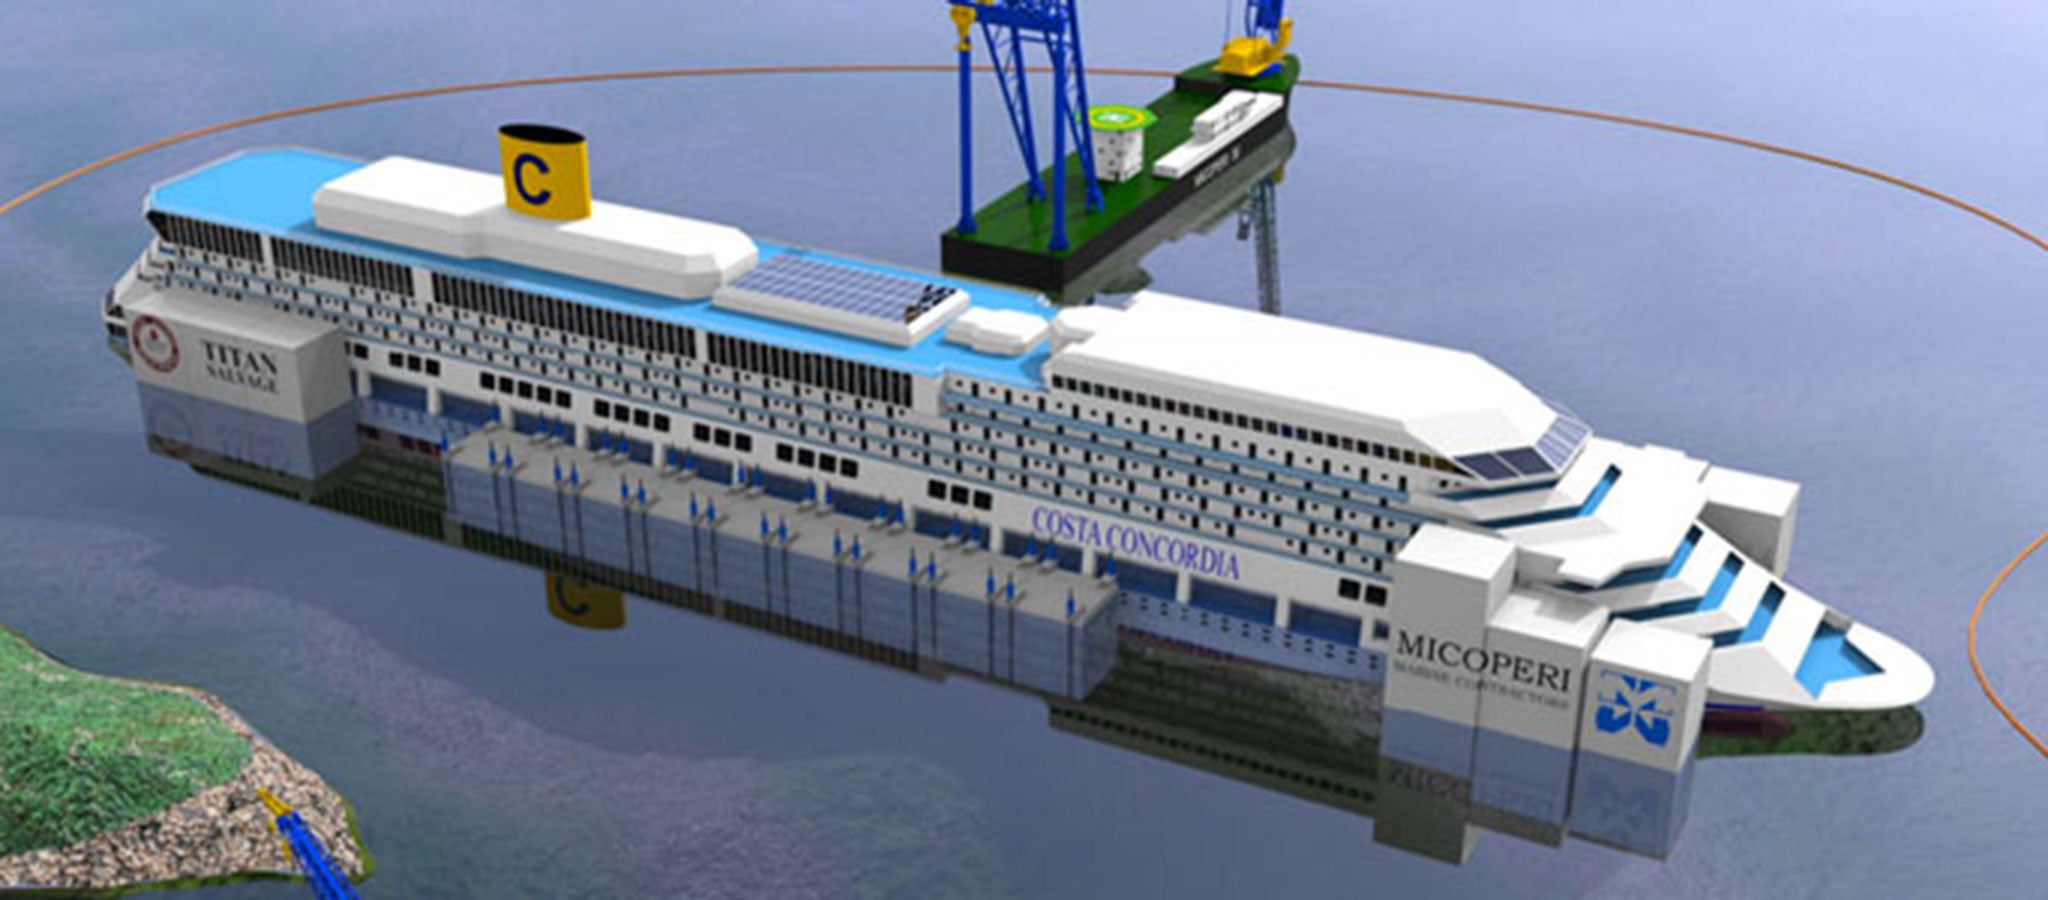 A simulation of the refloating of the Costa Concordia. Photo: The Parbuckling Project